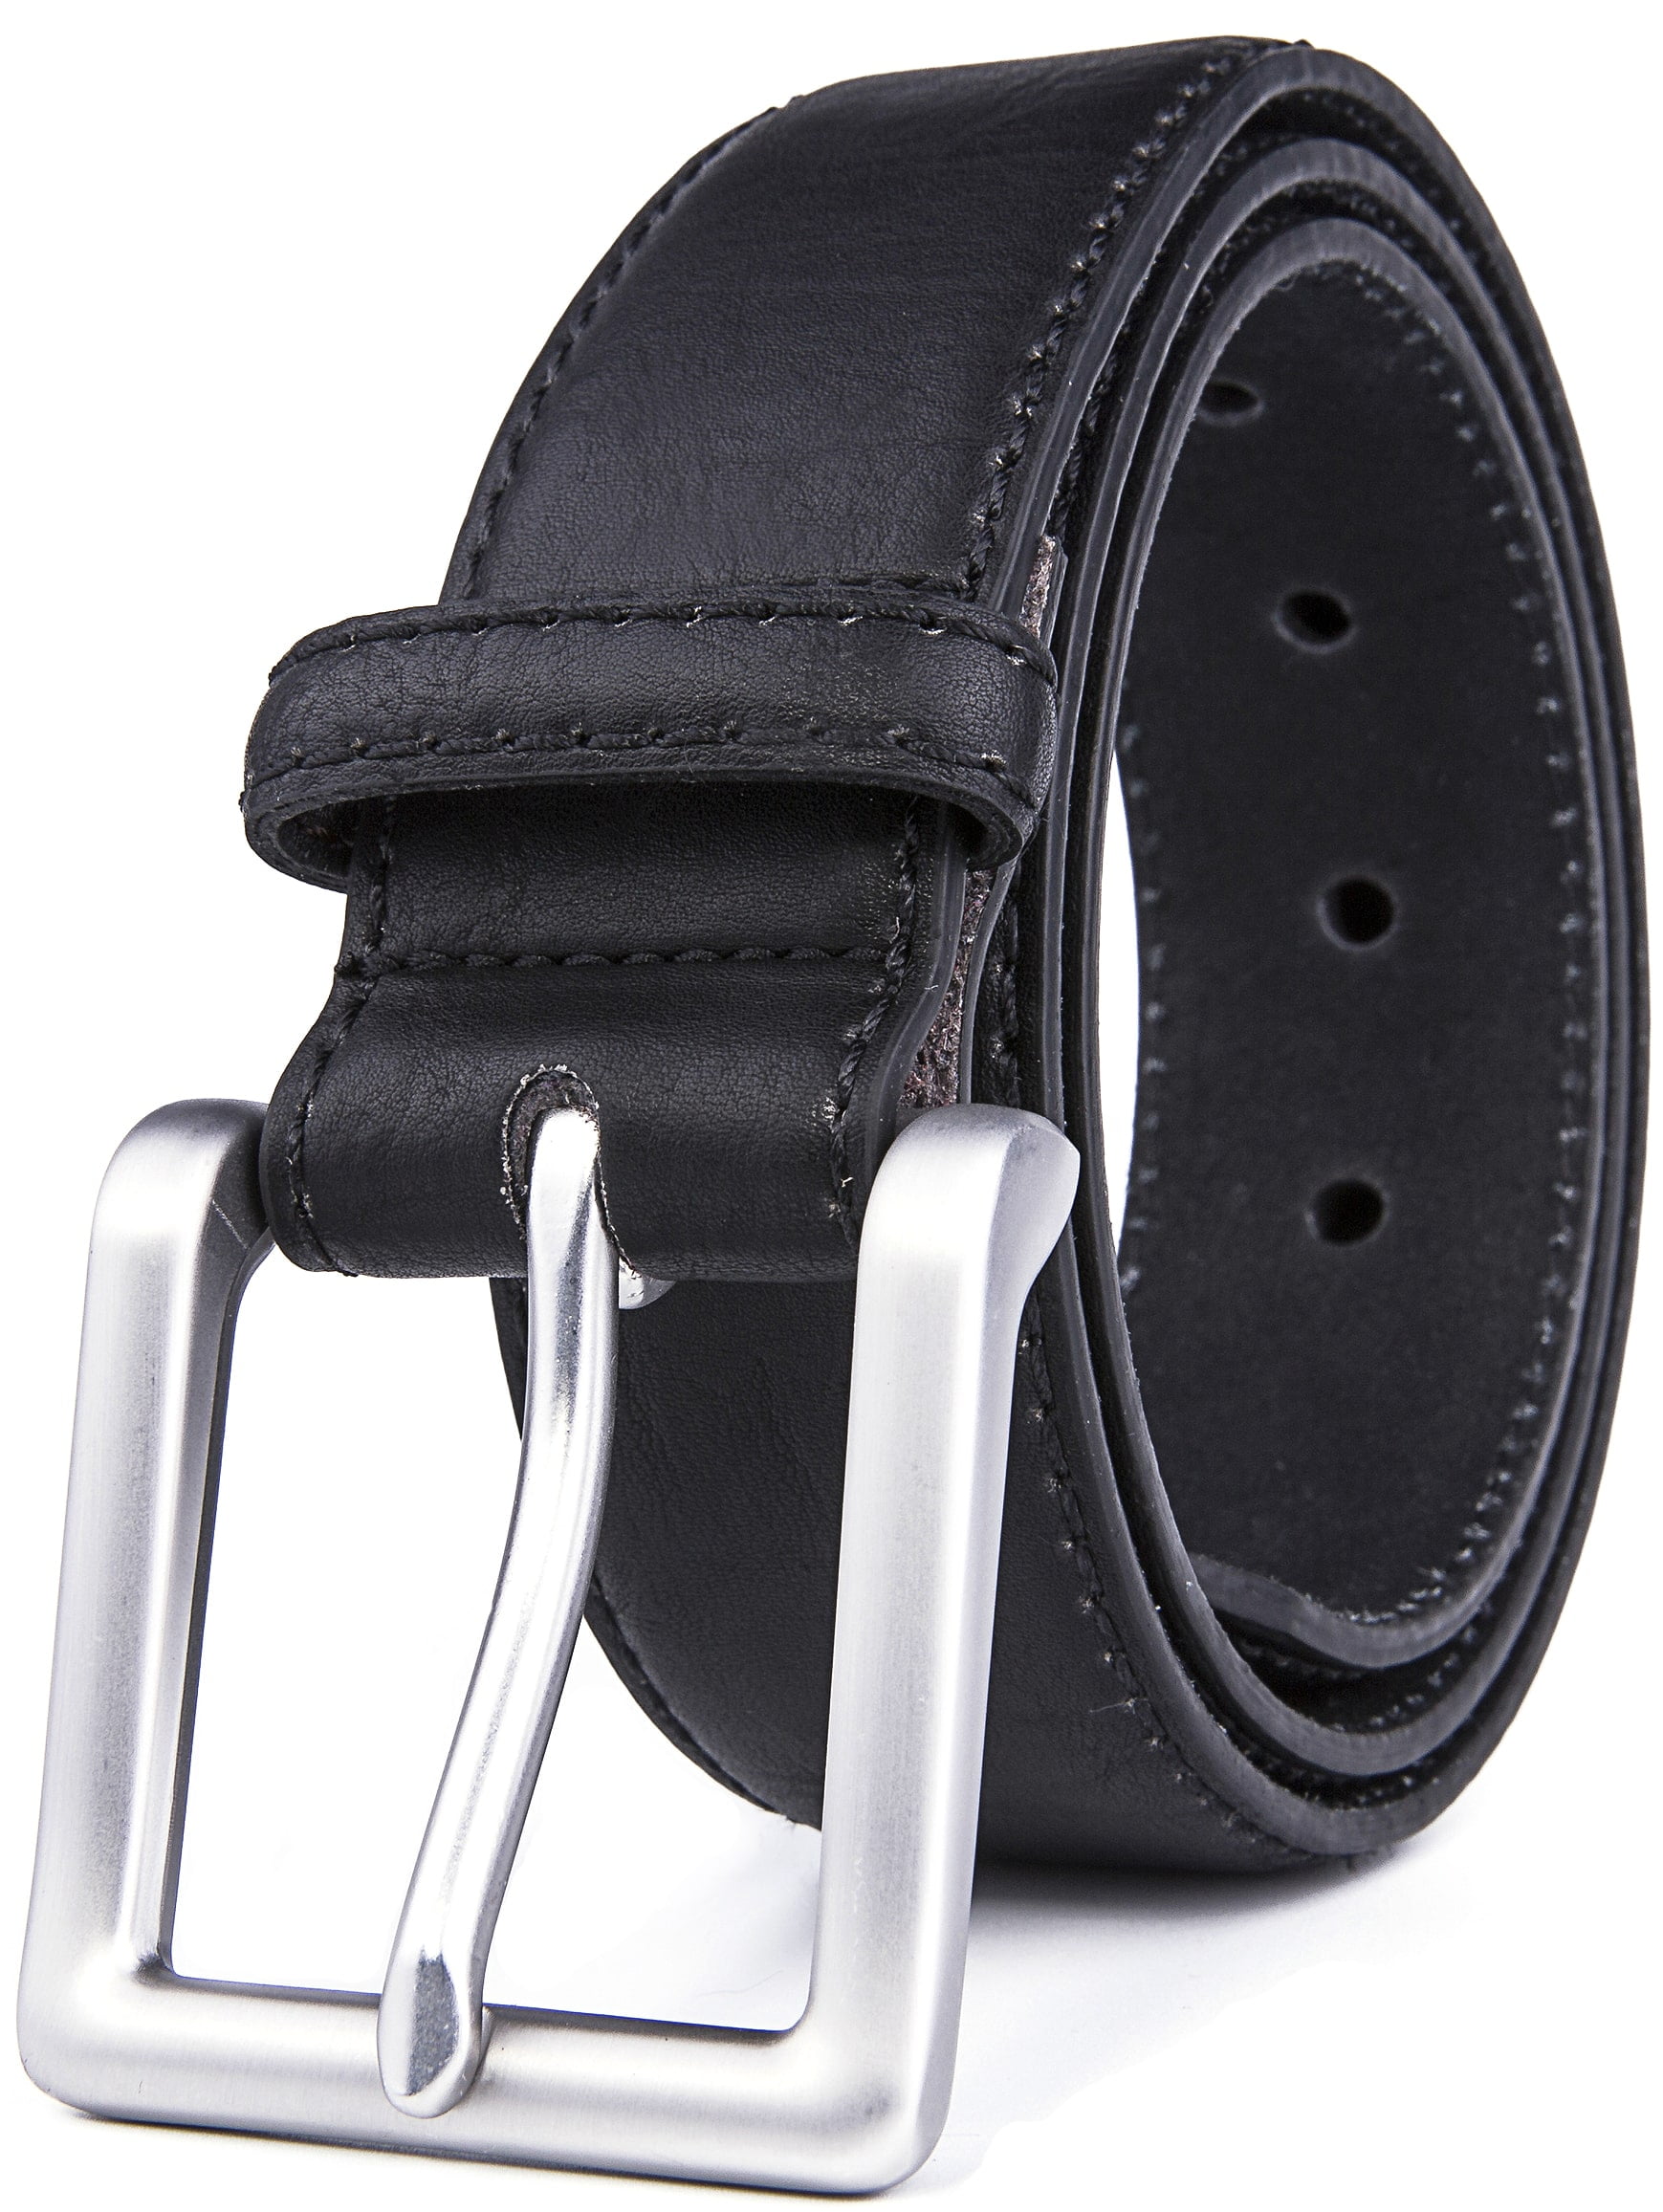 Belts for Men Genuine Leather Dress Belt Reversible with 1.3 Wide Rotated Buckle